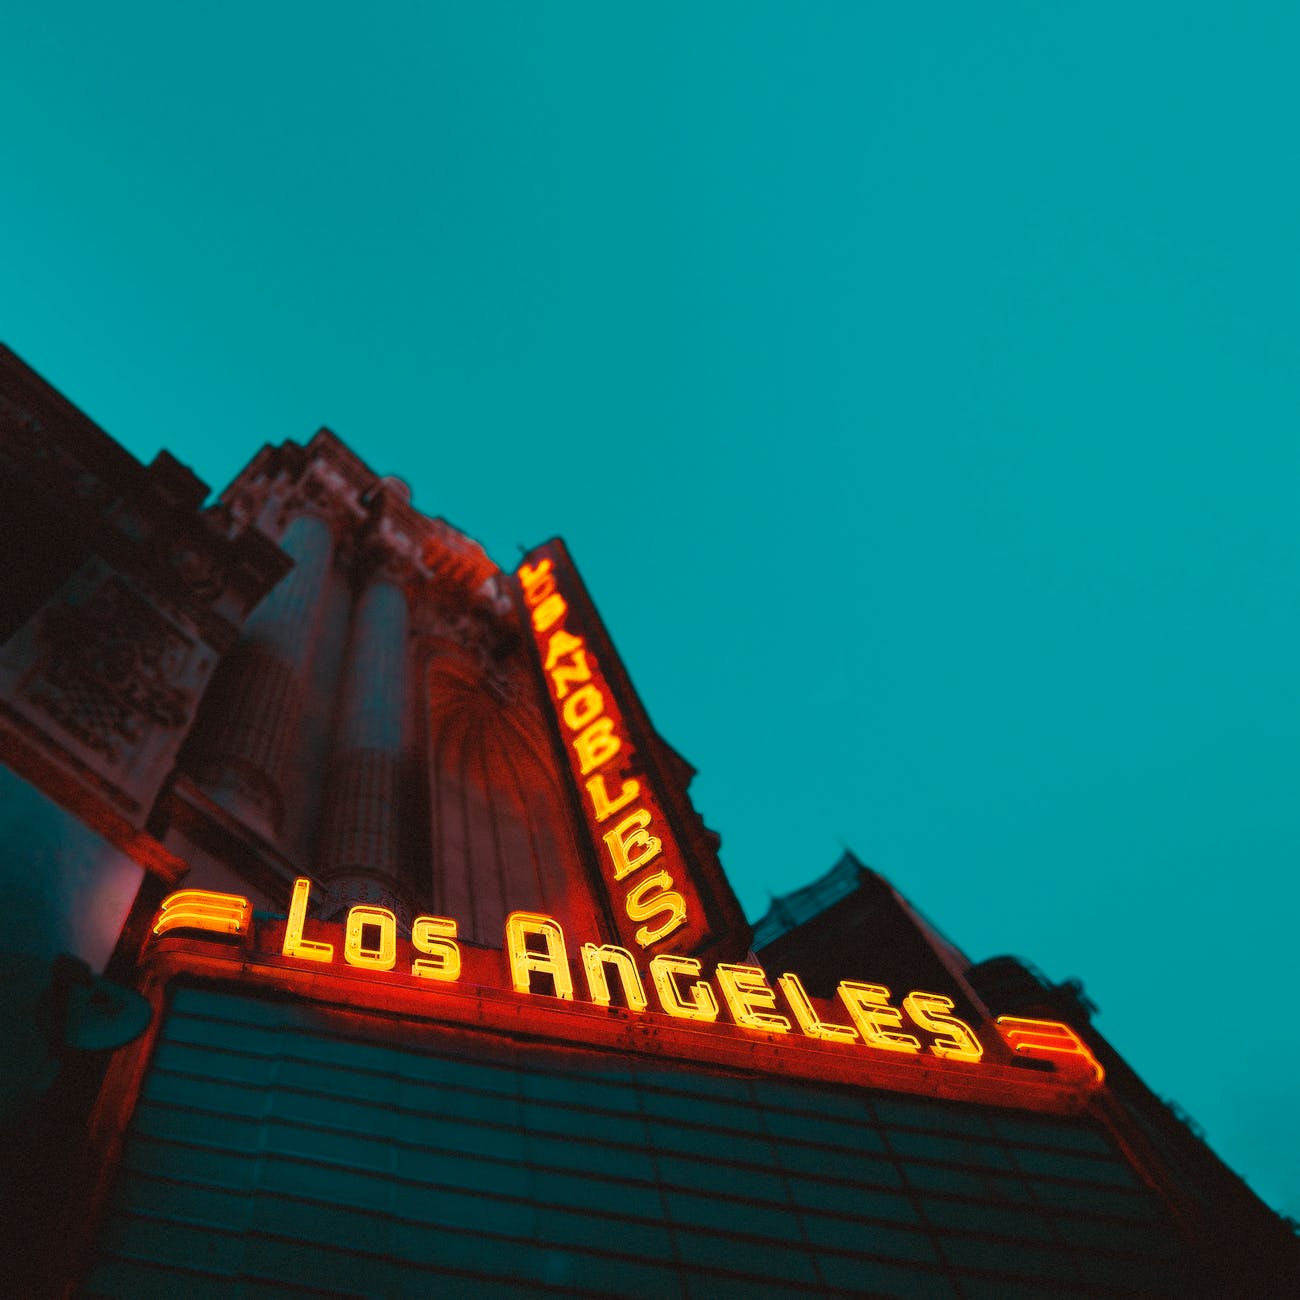 low angle photography of brown building with los angeles led sign